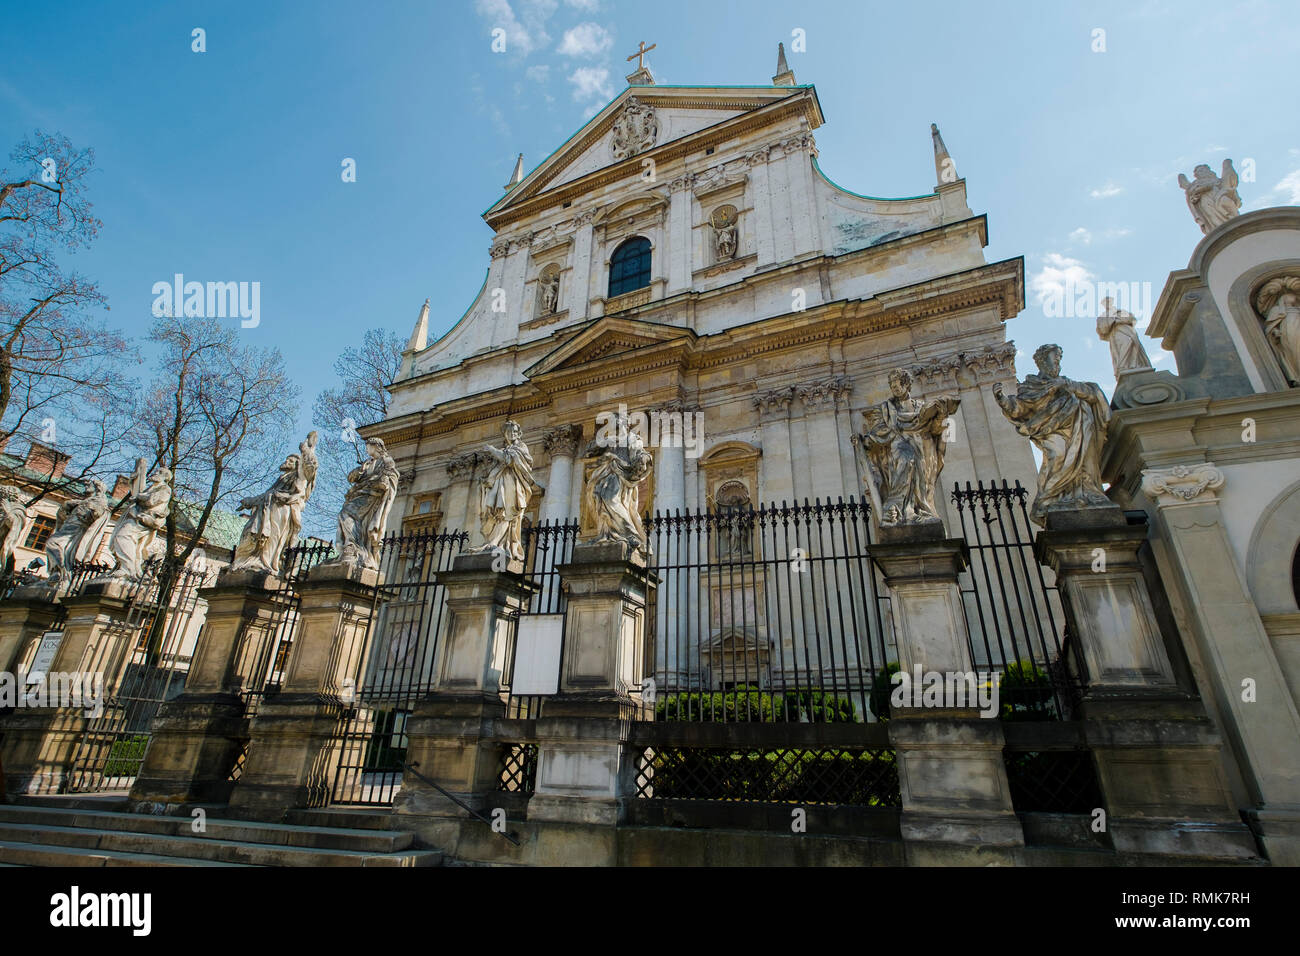 The impressive facade of Church of Saints Peter and Paul in Krakow, Poland. Stock Photo